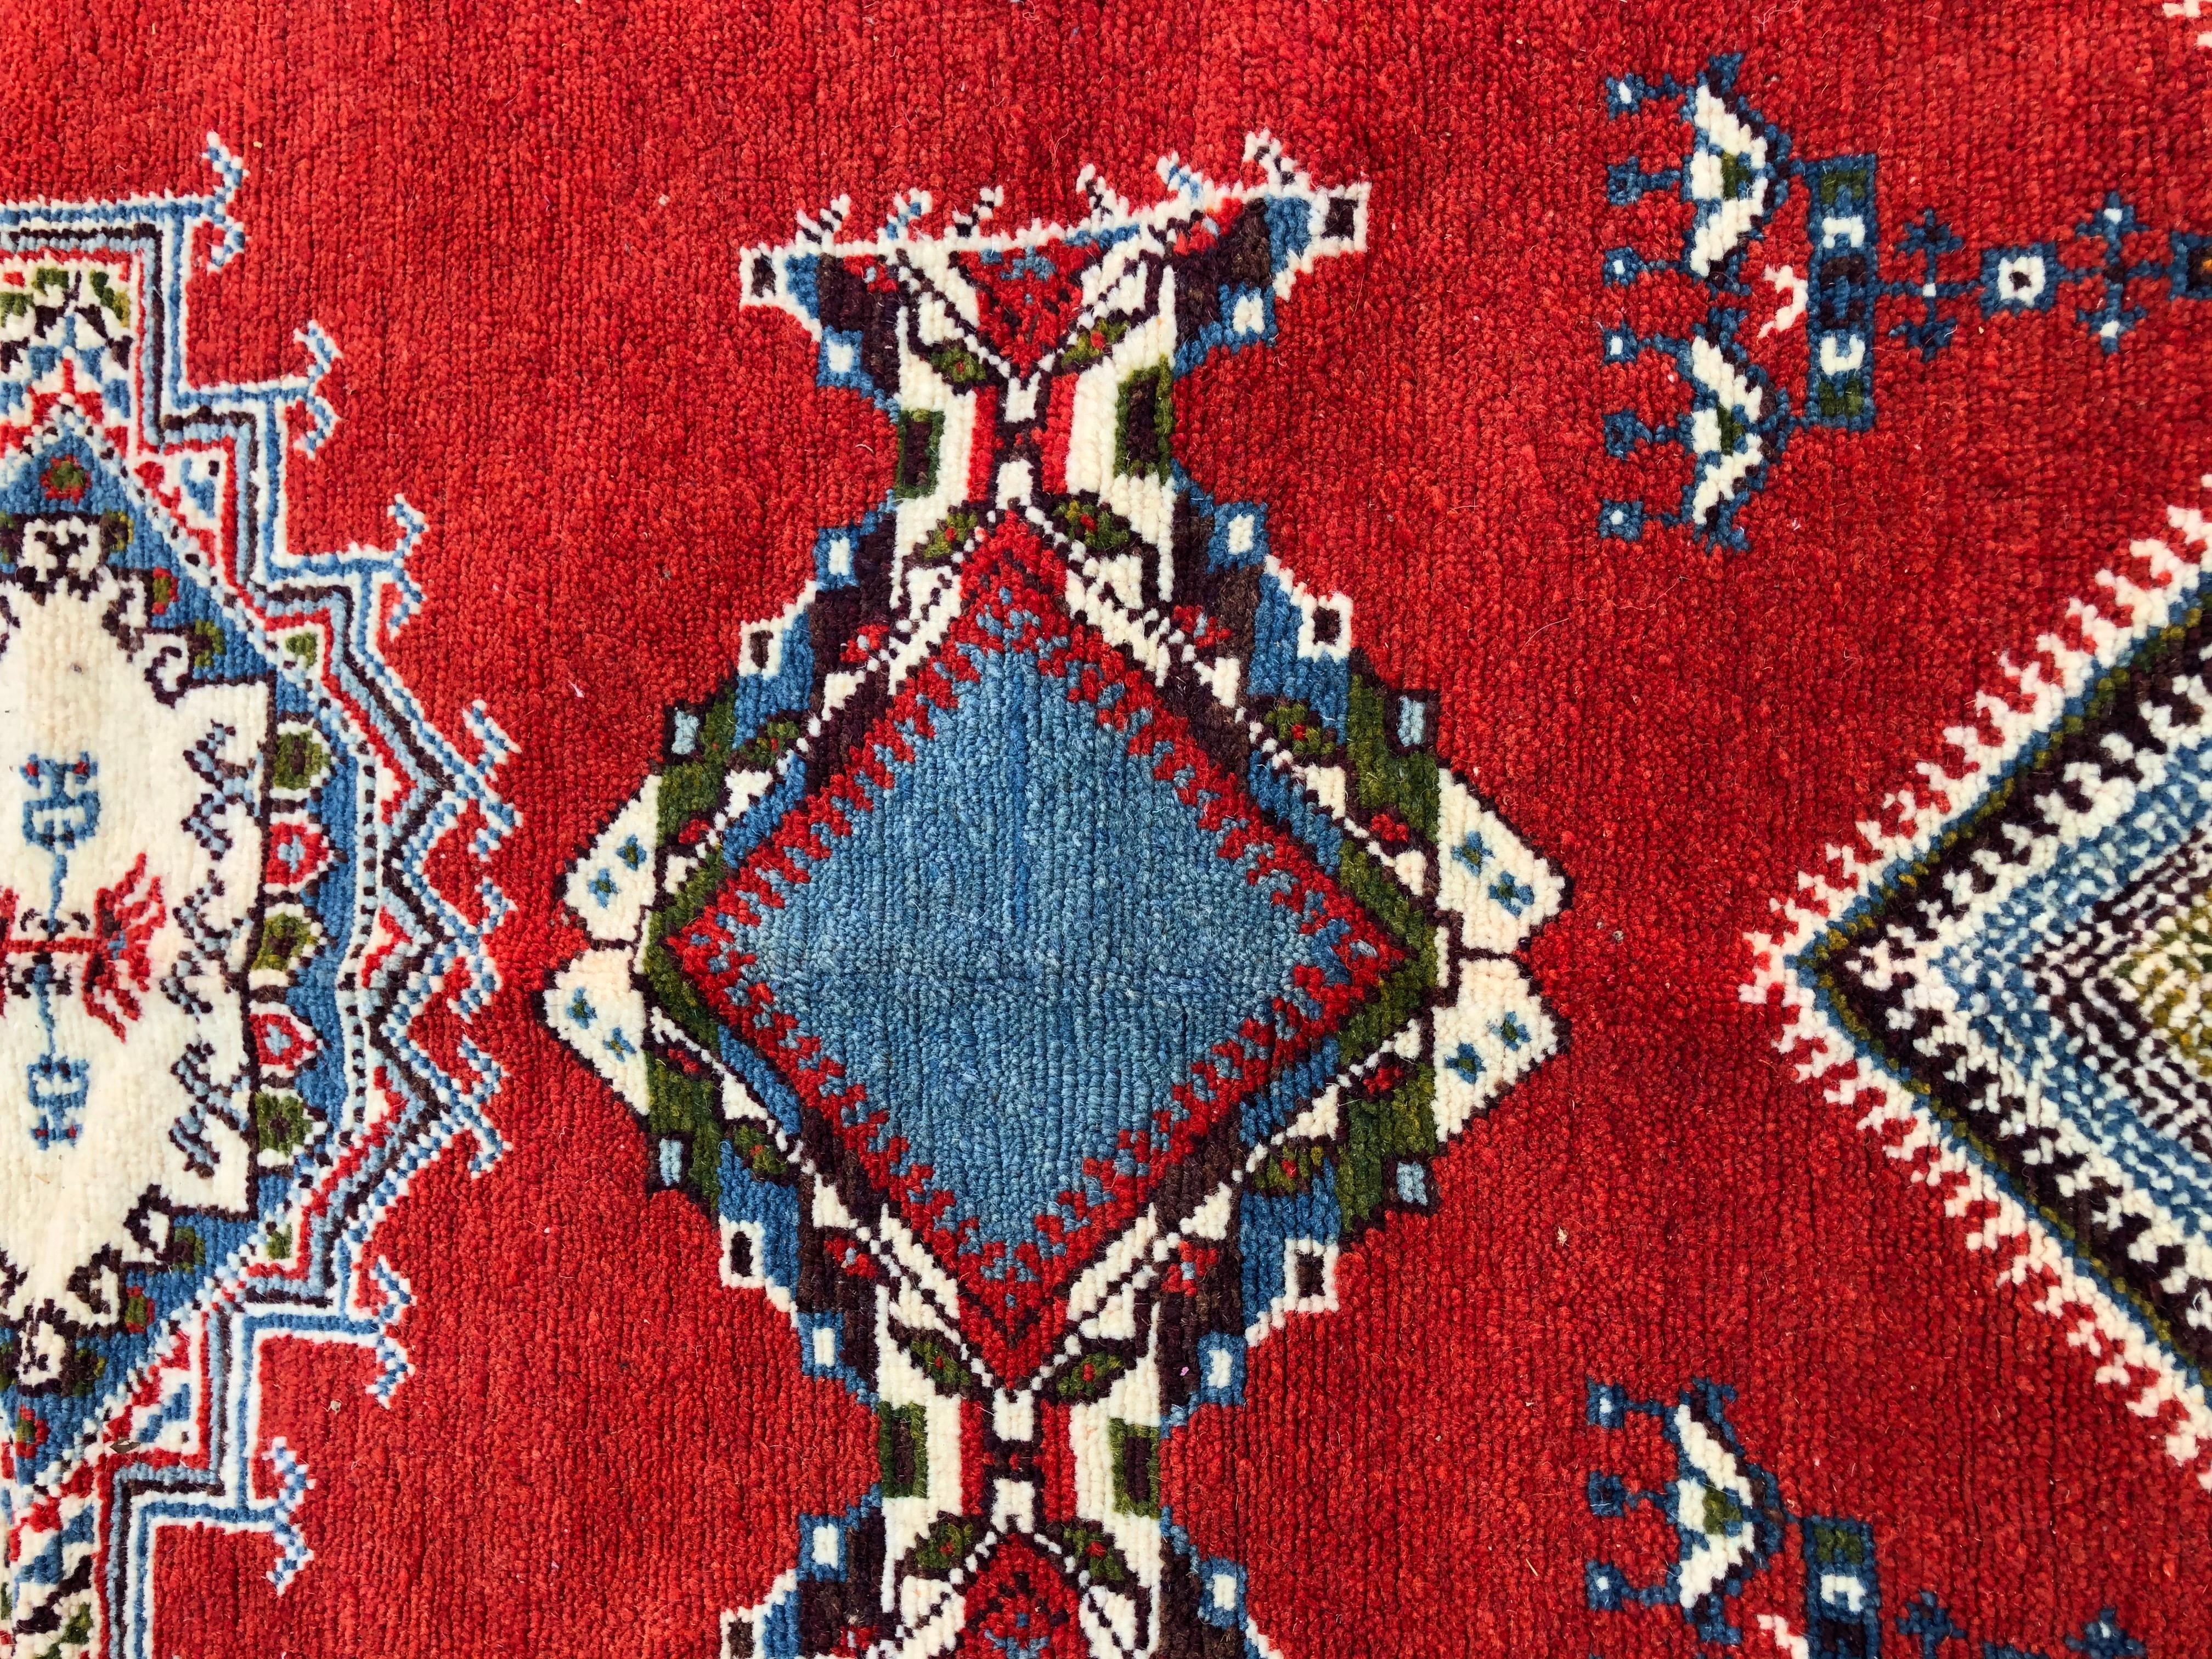 Hand-Woven Moroccan Tribal Handwoven Wool Geometrical Diamond Design Red Rug or Carpet  For Sale